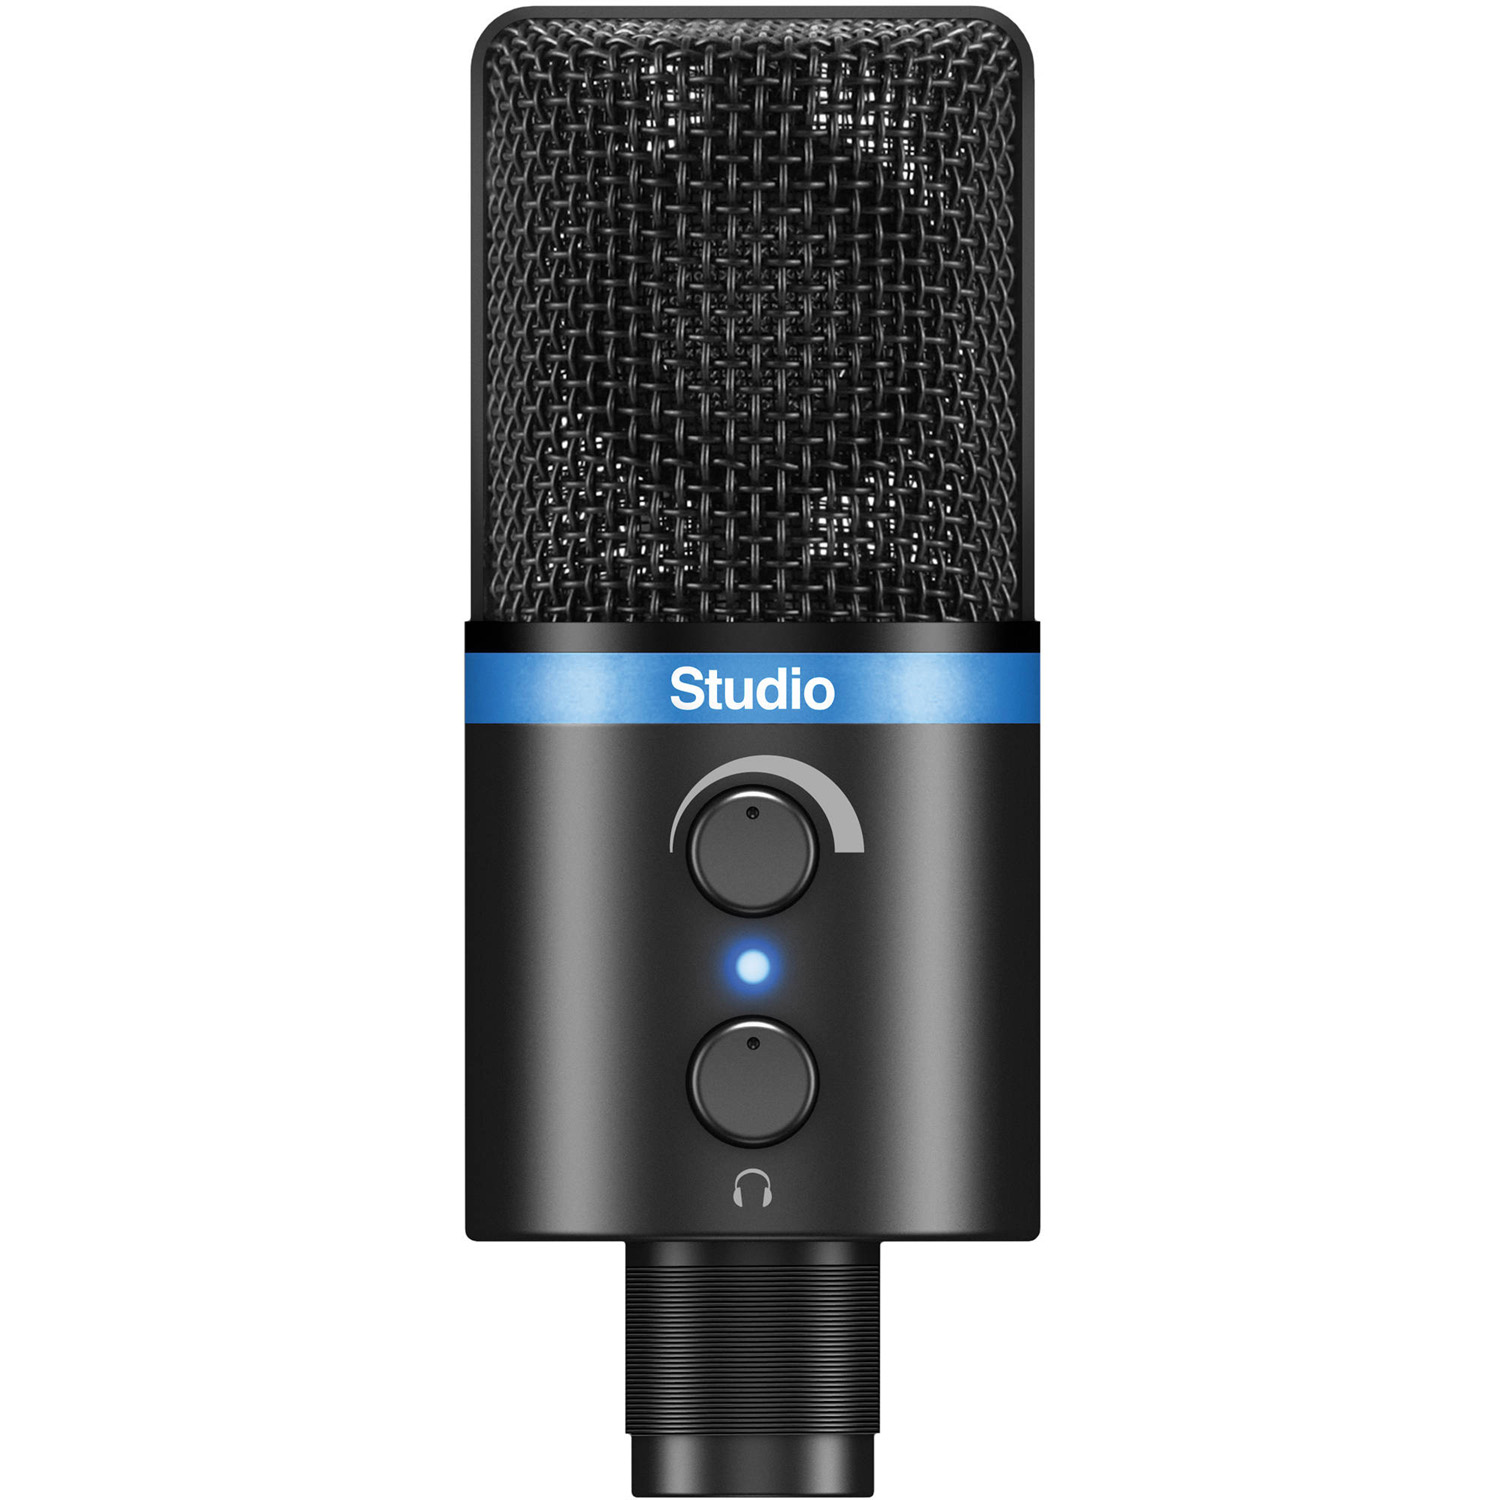 IK Multimedia iRig Mic Studio USB Condenser Microphone IK Multimedia iRig Mic Studio USB Condenser Microphone - Introducing iRig Mic Studio, IK Multimedia’s ultra-portable large-diaphragm digital condenser microphone for iPhone, iPad, iPod touch, Mac, PC and Android. It packs a 1” diameter condenser capsule into an ultra-compact enclosure that can be used to make professional-quality recordings anywhere. Great for musicians, vocalists, home producers, podcasters, broadcasters, voice-over artists and more, it puts the superior power of a large-diaphragm microphone into the palm of your hand.